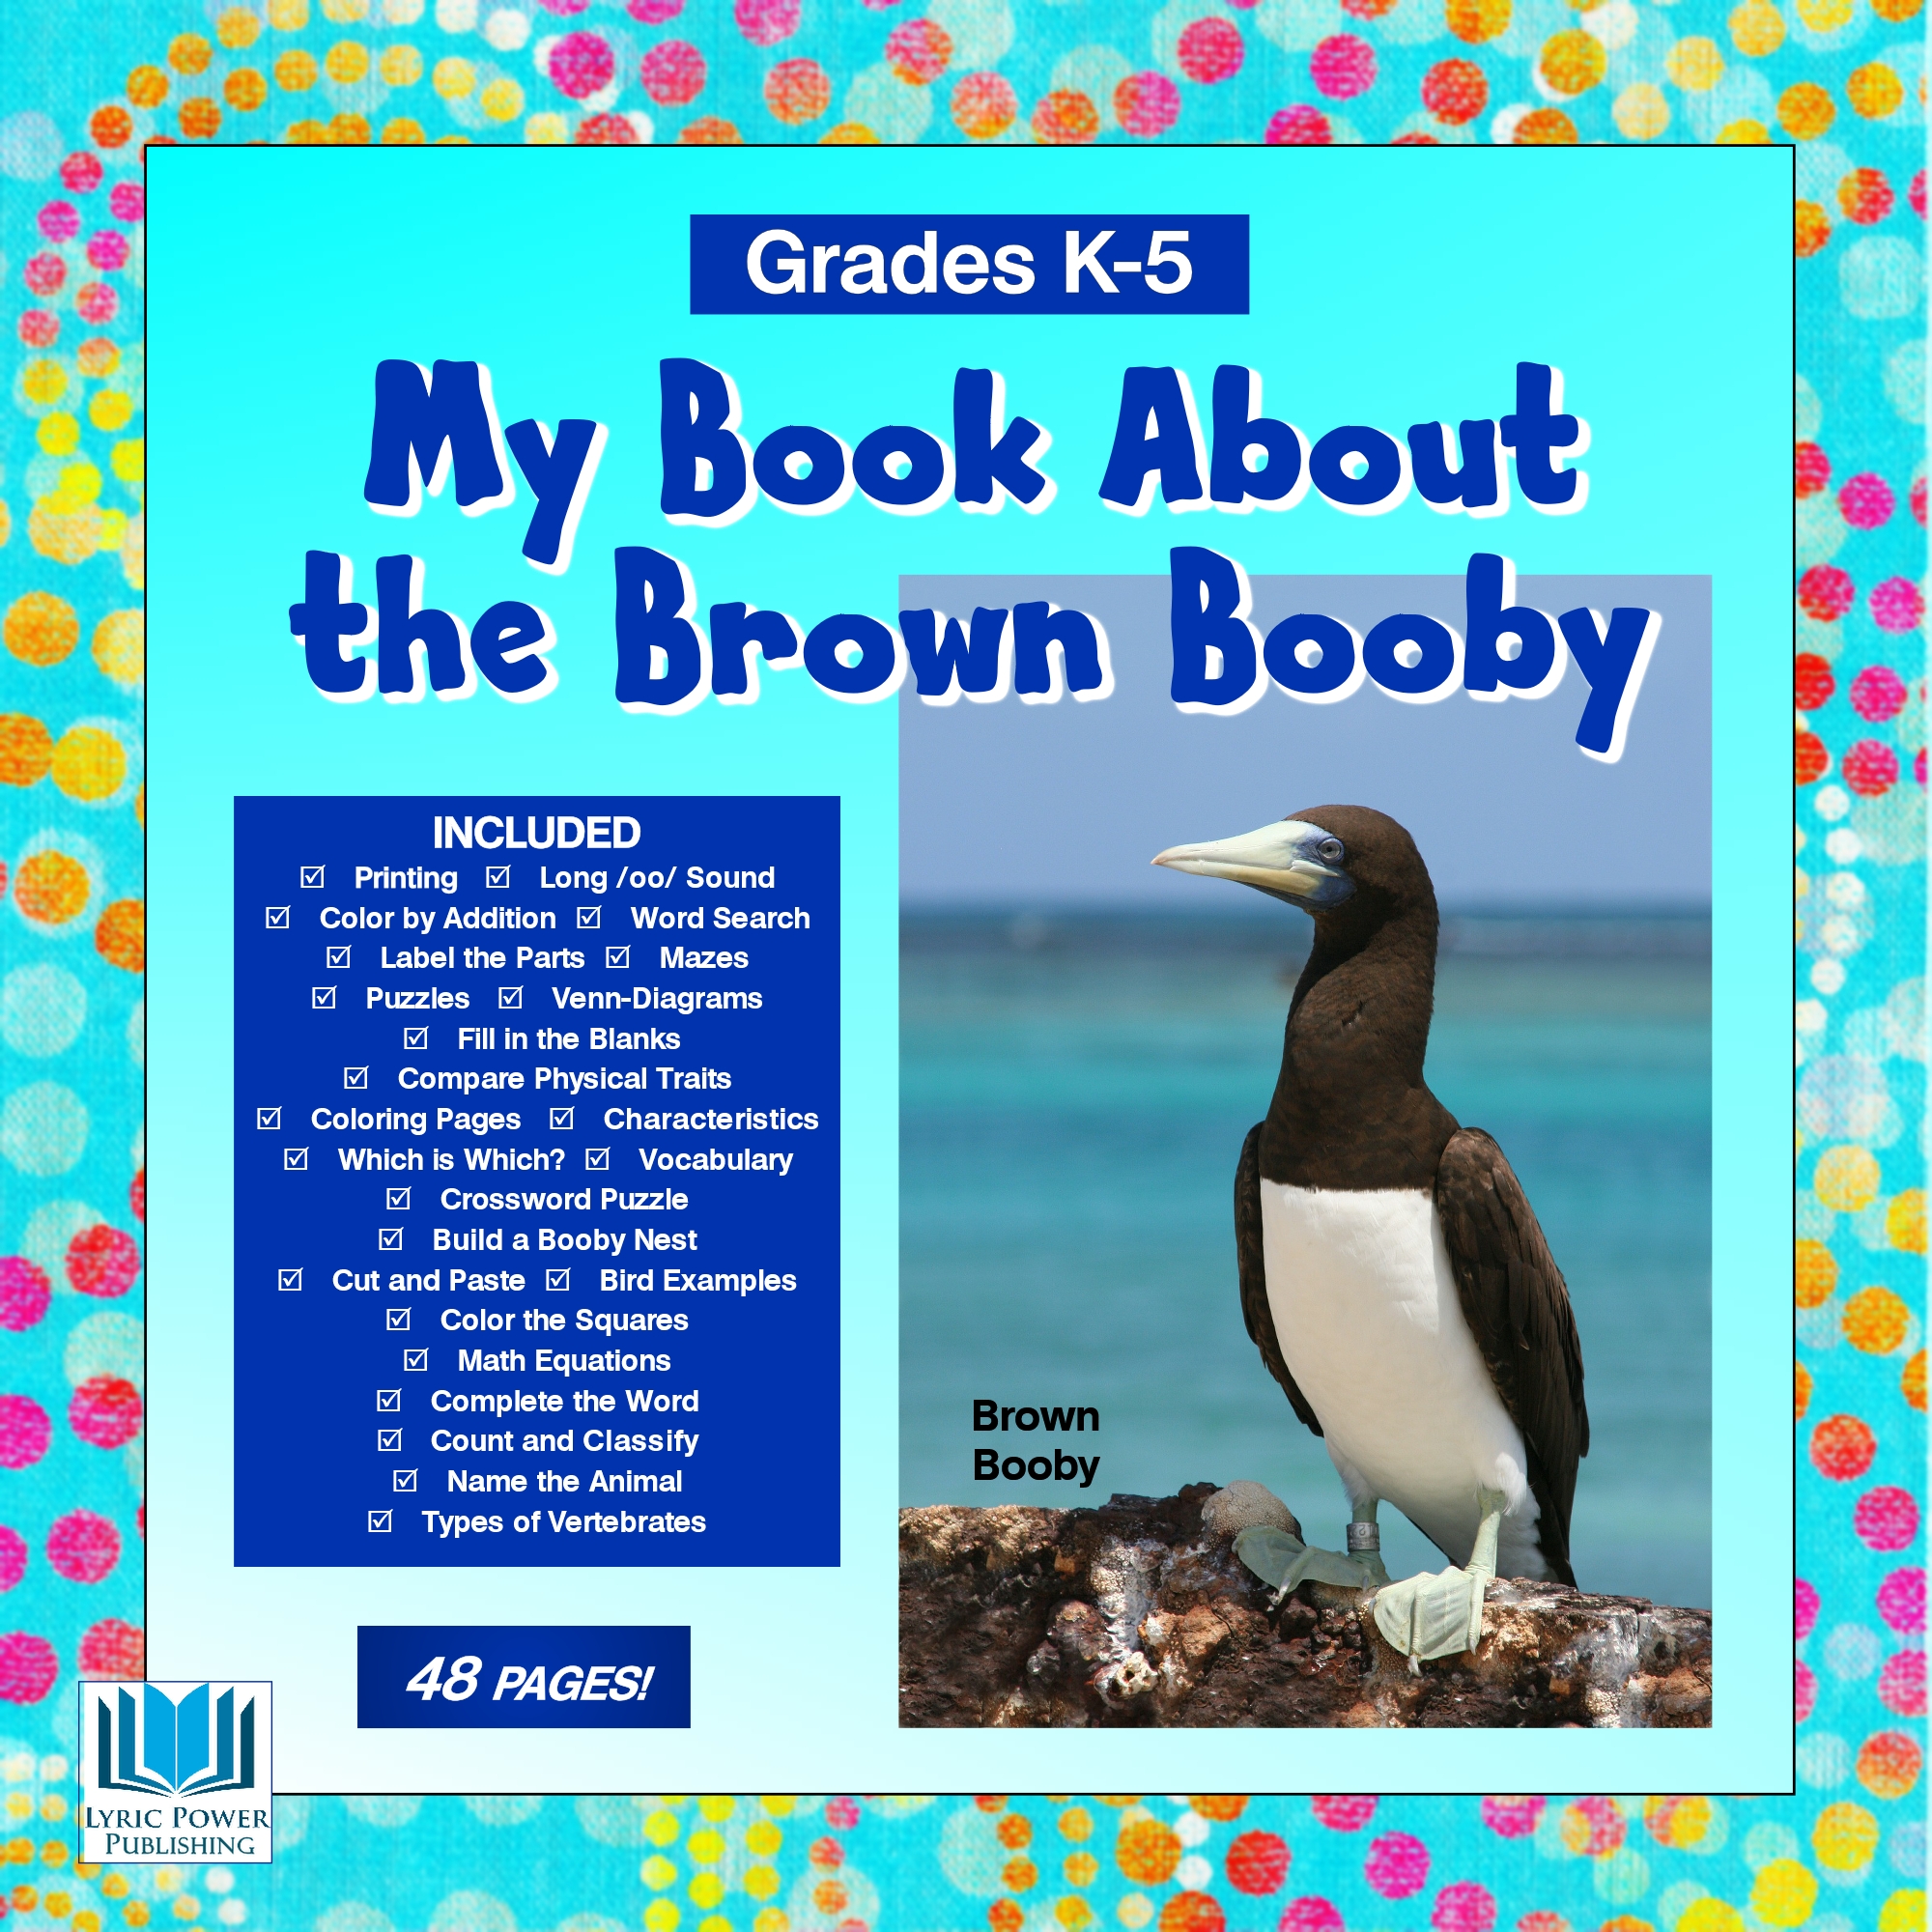 a blue and turquoise book cover with an image of the brown booby bird